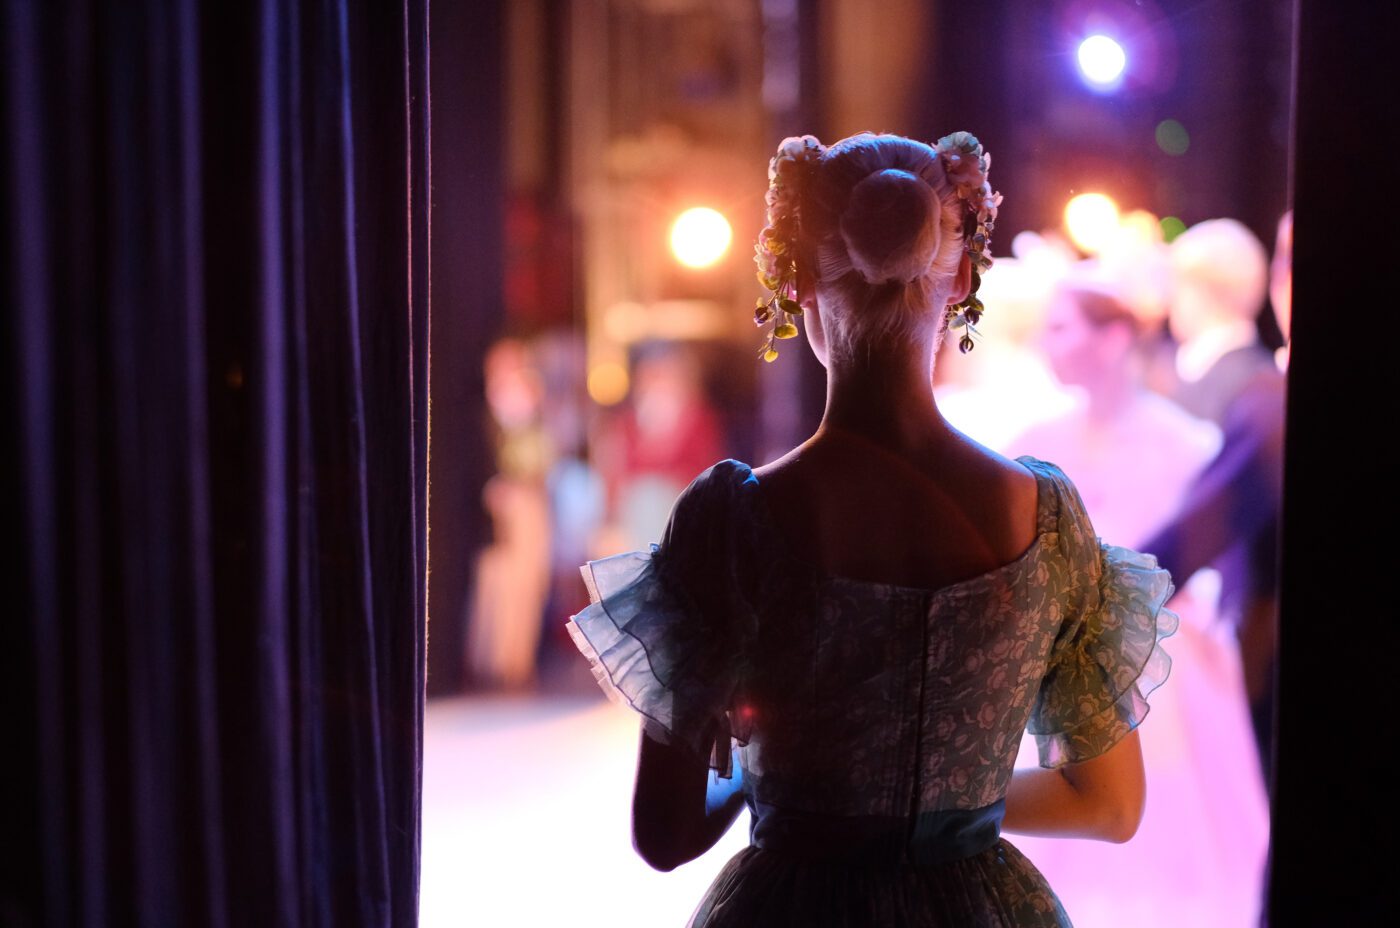 A actress awaiting the moment of entering the stage in the play